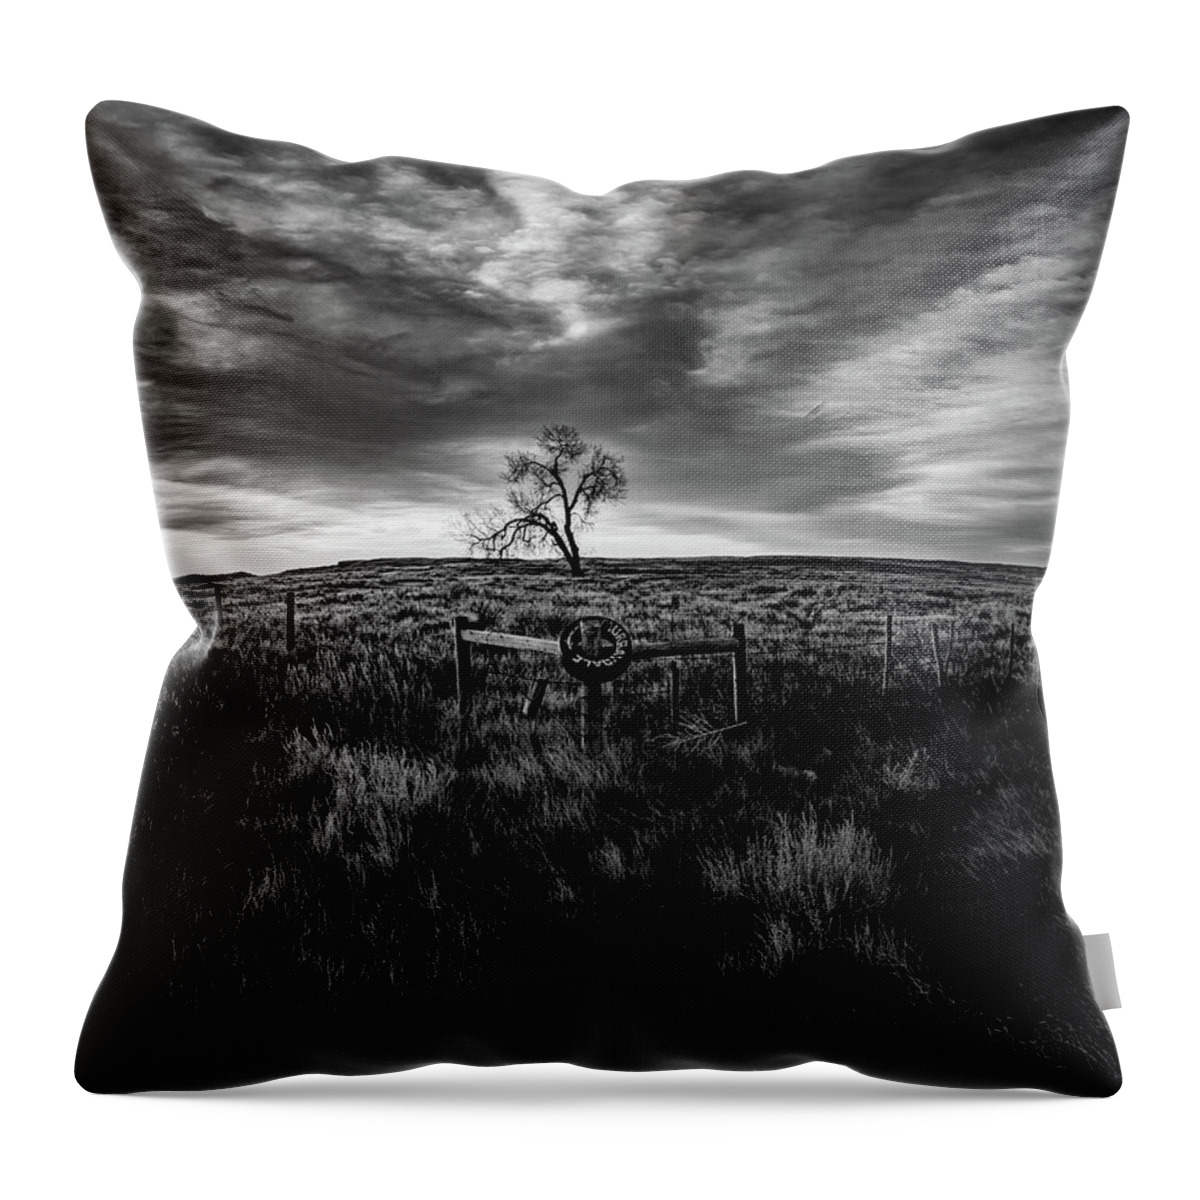  Throw Pillow featuring the photograph Murray Tree Monochrome by Darcy Dietrich